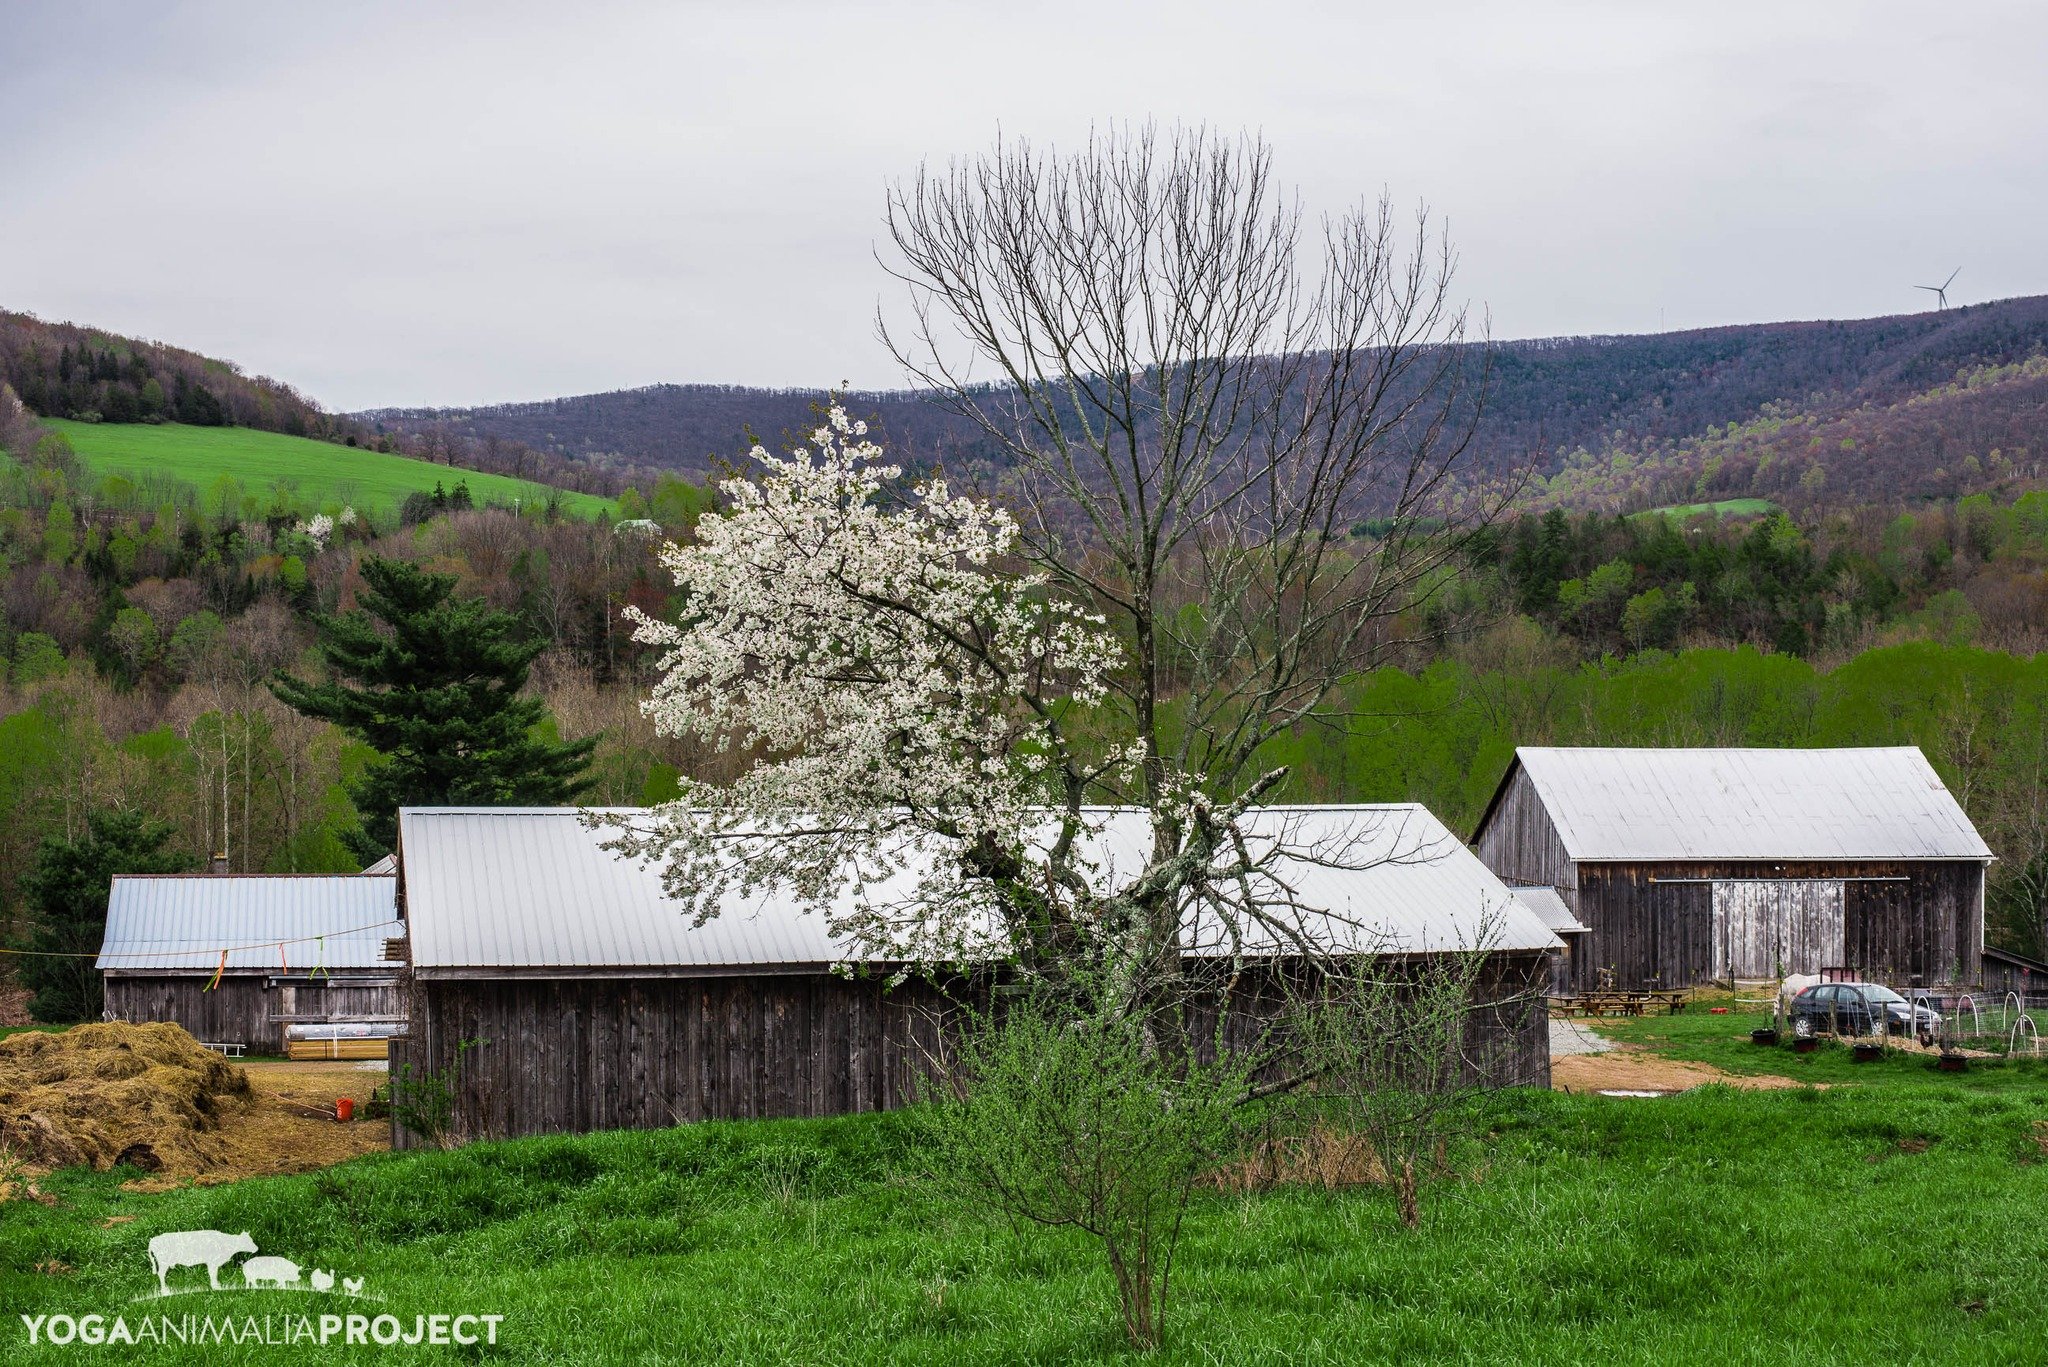 From the Archives: One week and seven years ago, I was spending a remarkable spring day in Mehoopany, Pennsylvania at the former @indralokaanimalsanctuary  location that I called home numerous times over the course of the Yoga Animalia Project travel